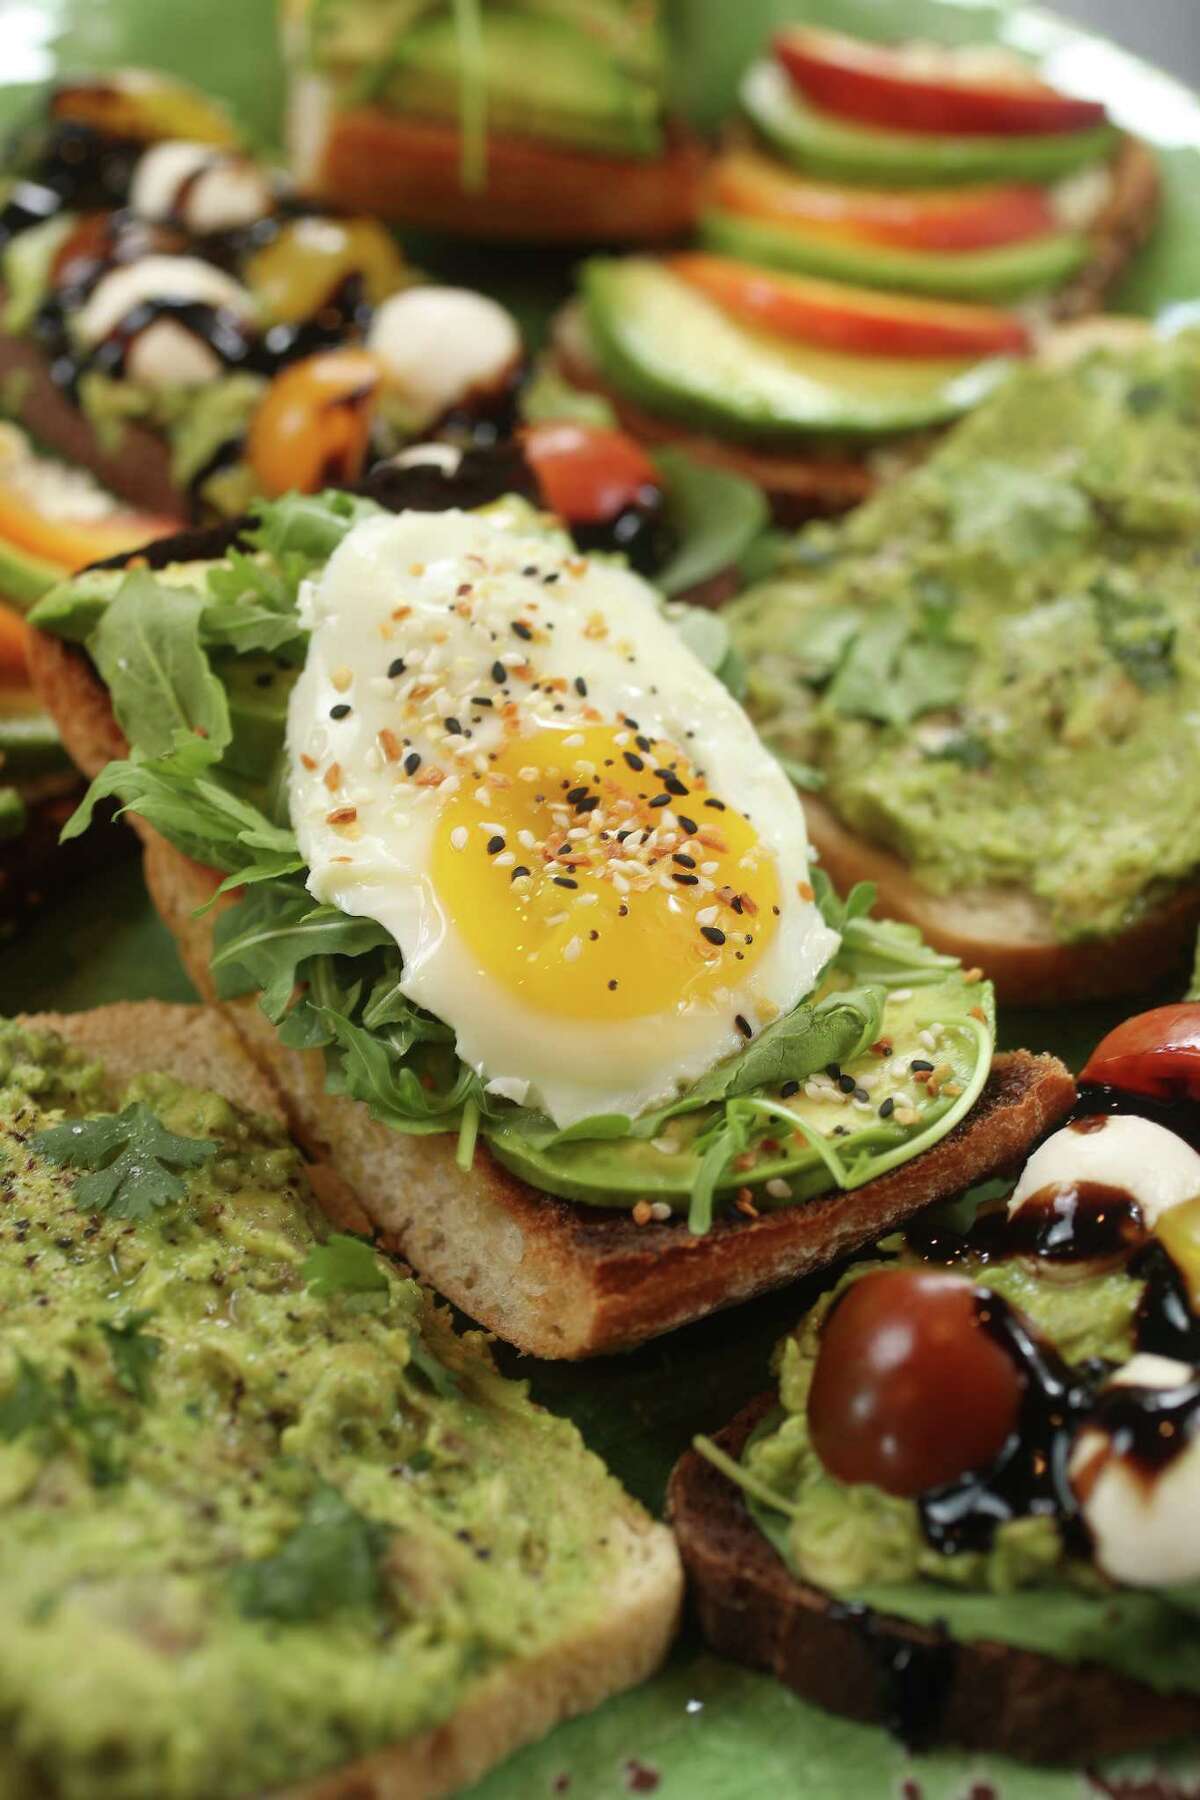 We created four avocado toast recipes that will fill the void in your life caused by crushing debt.